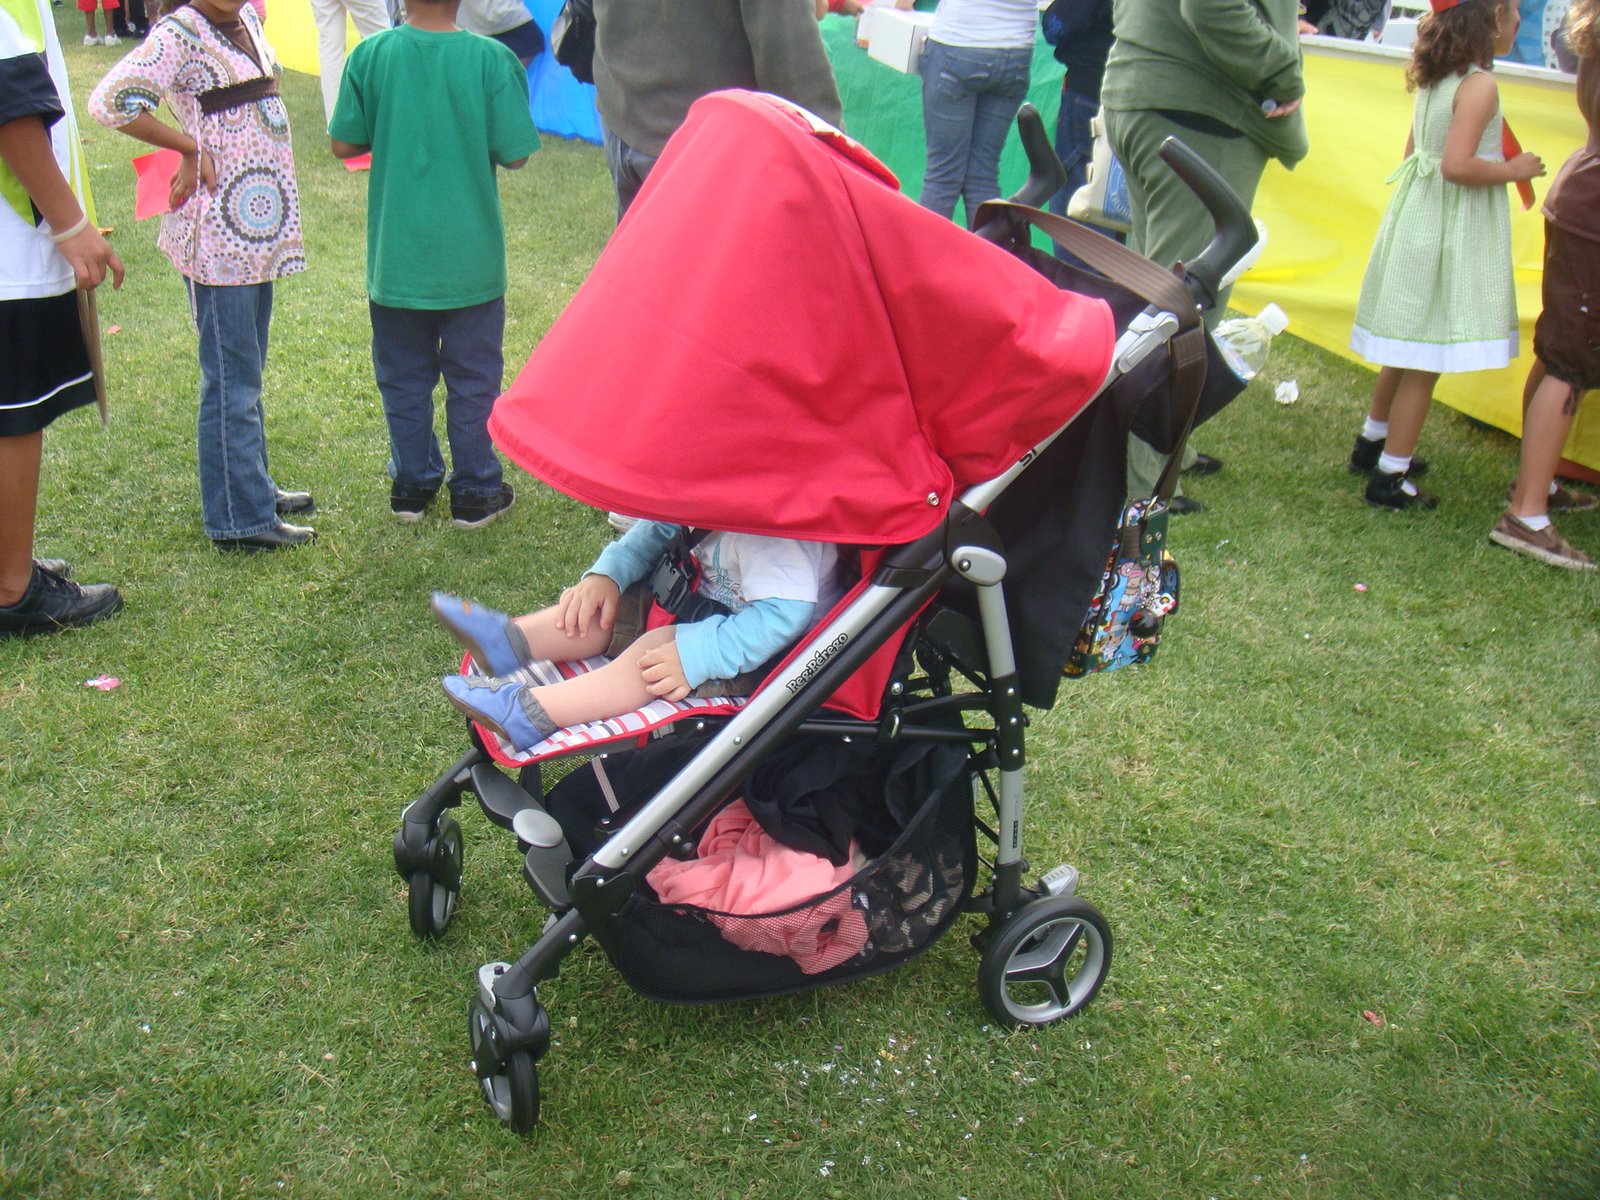 umbrella stroller with large canopy